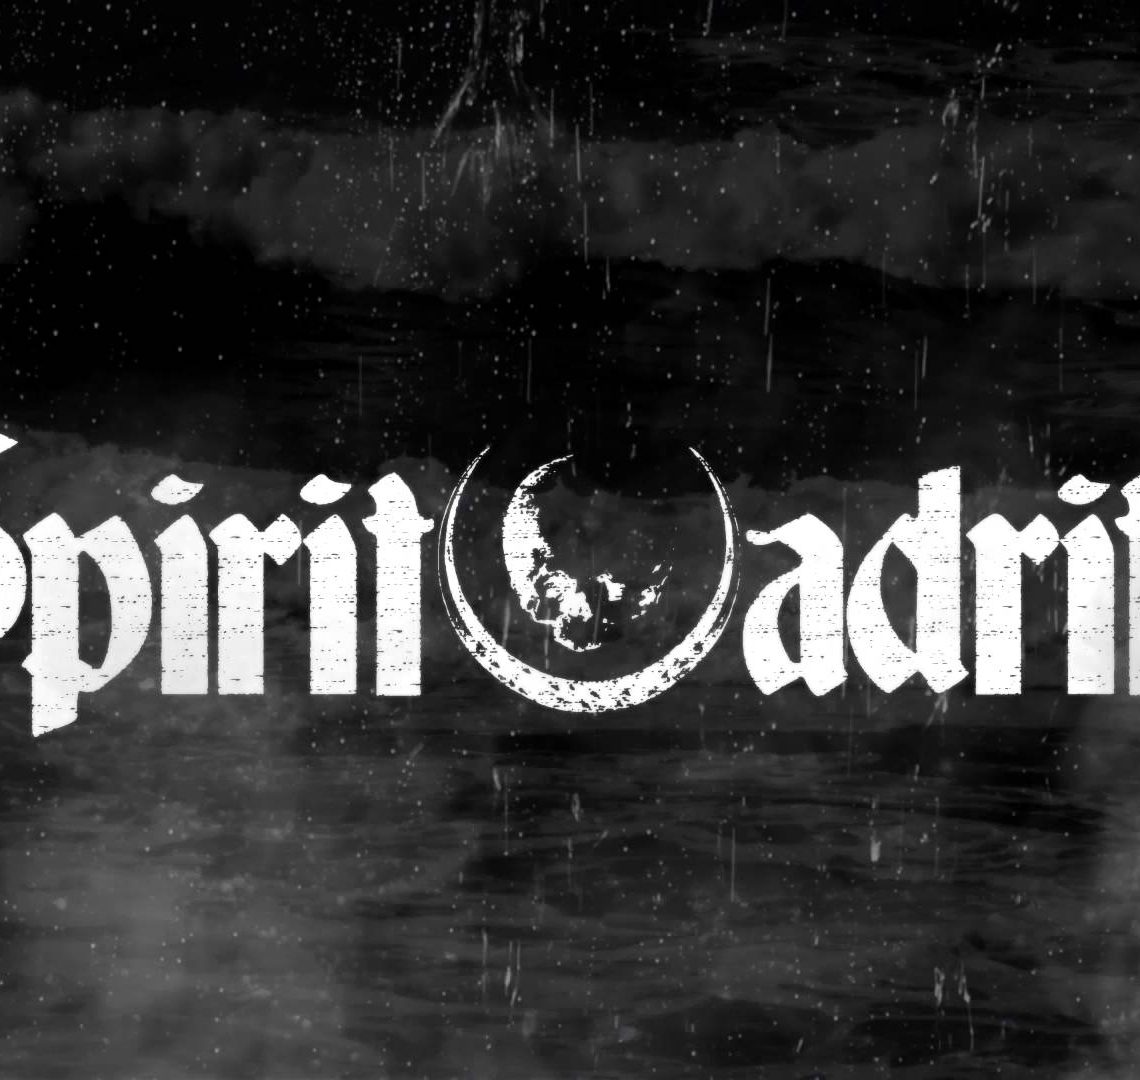 SPIRIT ADRIFT REVEAL NEW SINGLE FROM DEBUT ALBUM “CHAINED TO OBLIVION”